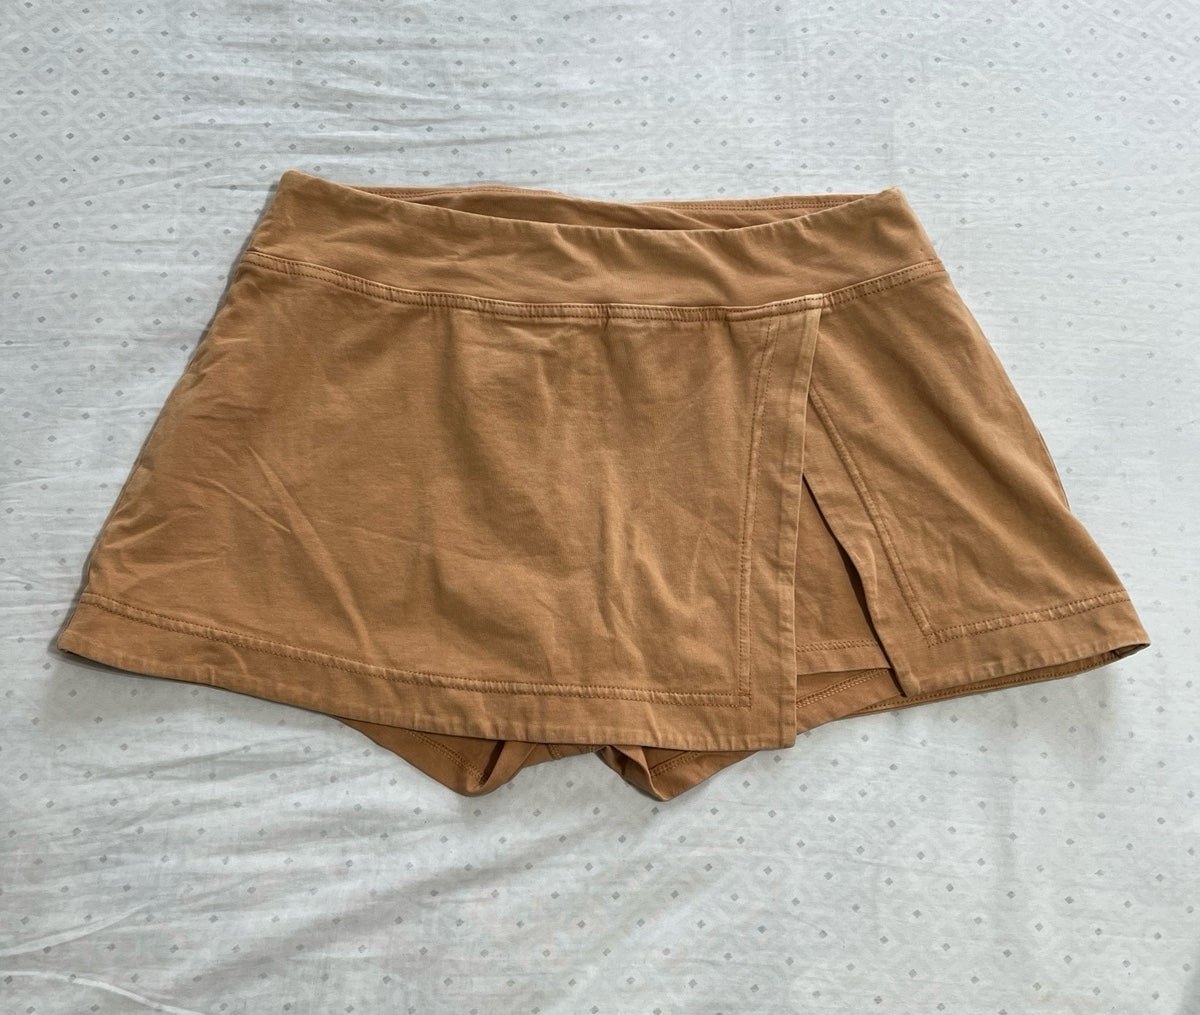 Authentic NEW FREE PEOPLE MOVEMENT HOT SHOT MINI SKORT SIZE LARGE HPvLkVyQI for sale